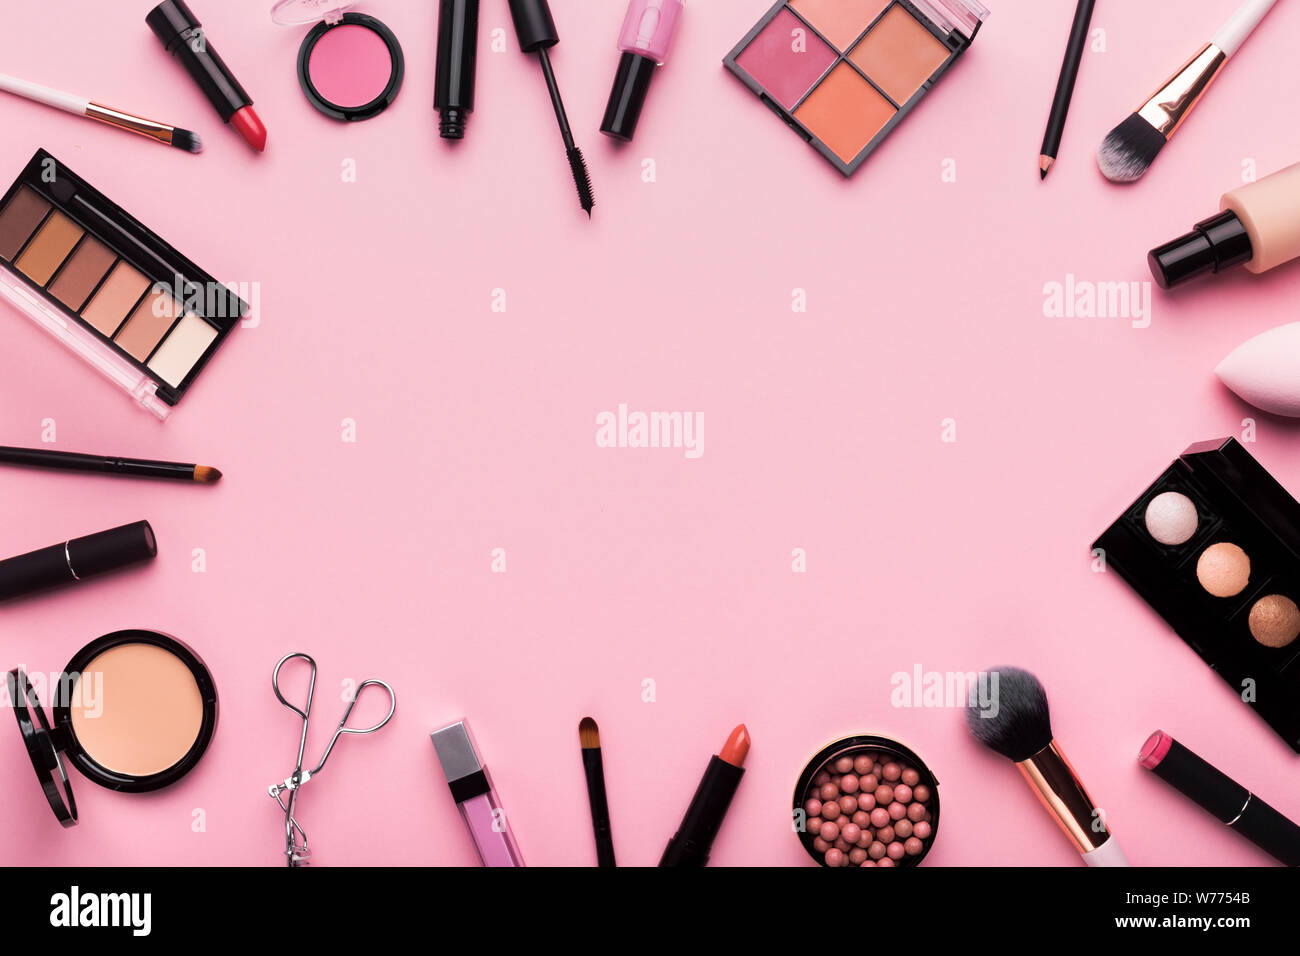 Frame of professional cosmetics and brushes around blank space Stock Photo